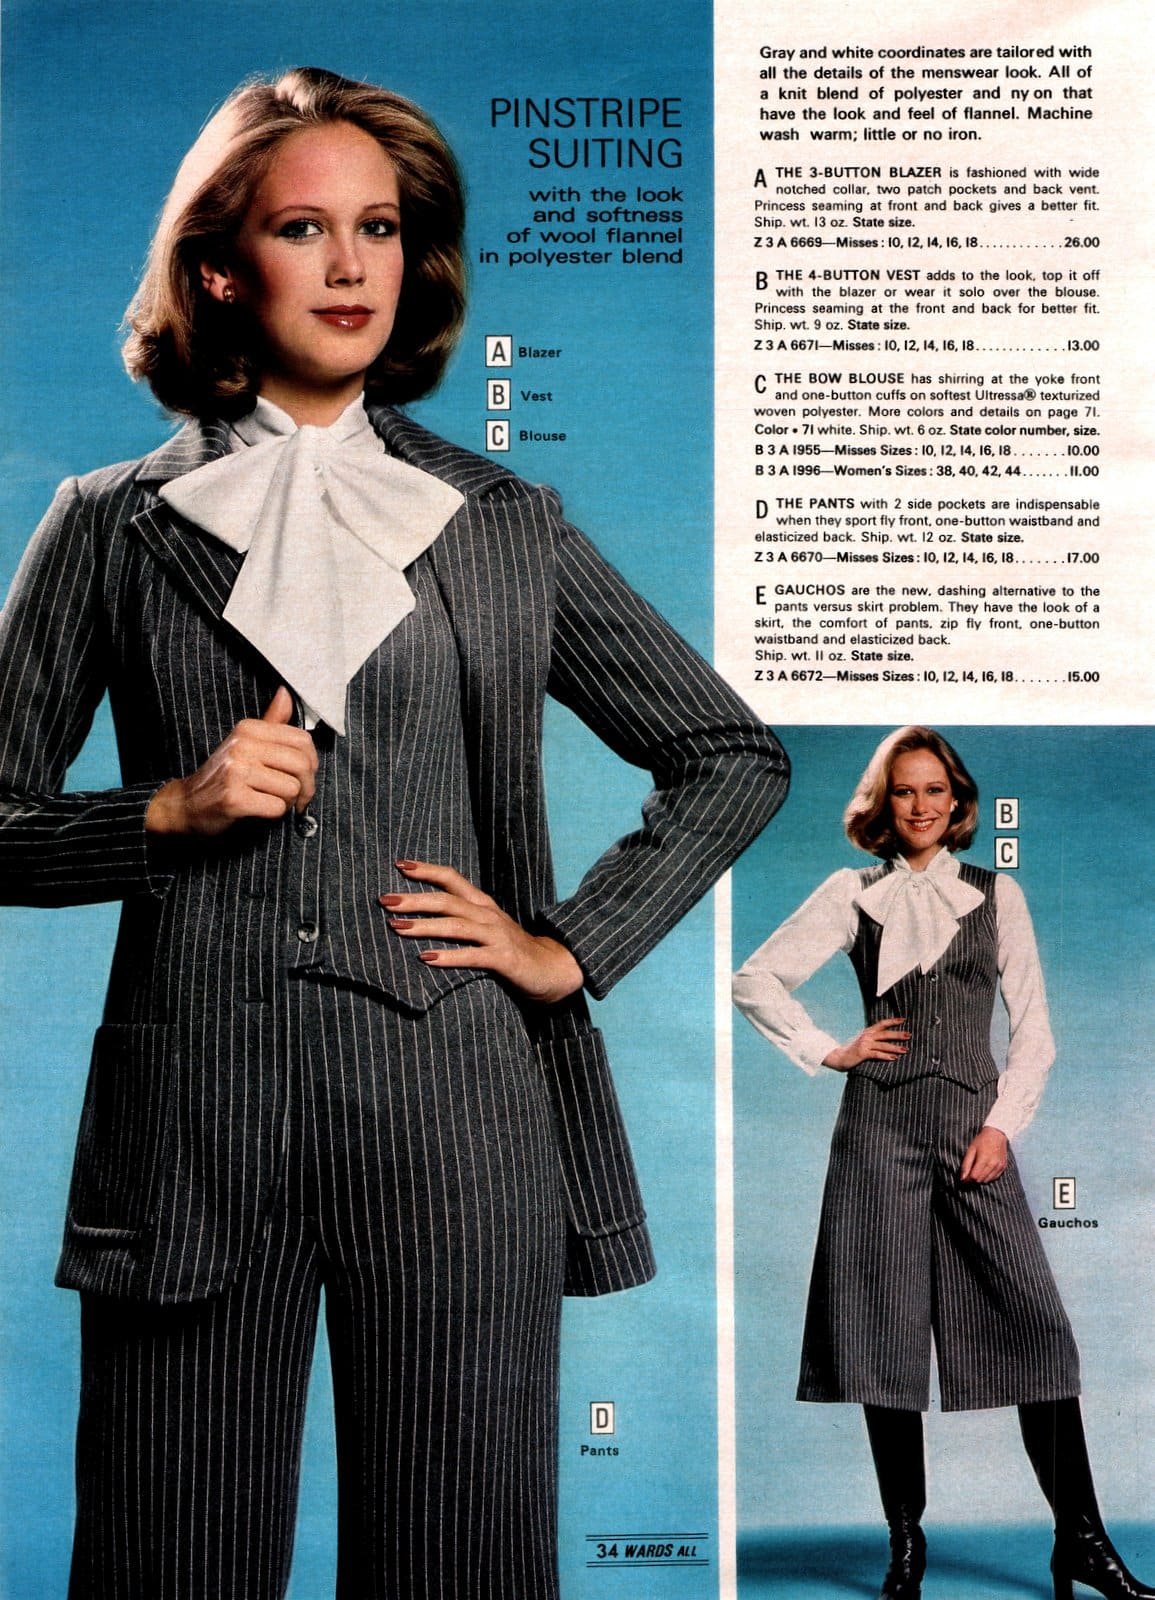 1970s Advertisement for Pinstripe Suiting